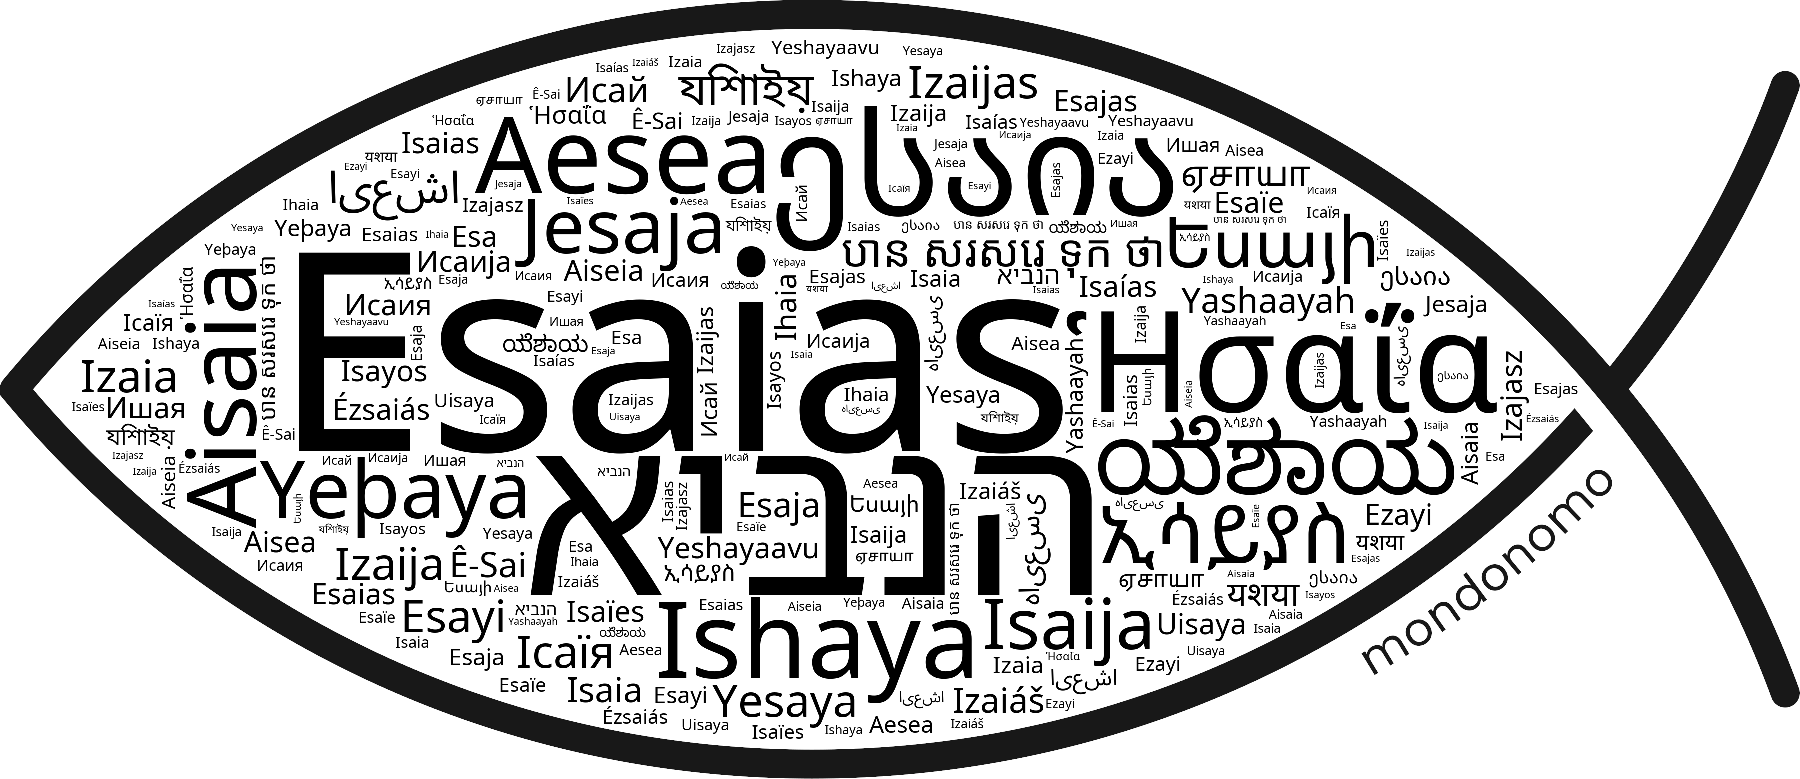 Name Esaias in the world's Bibles